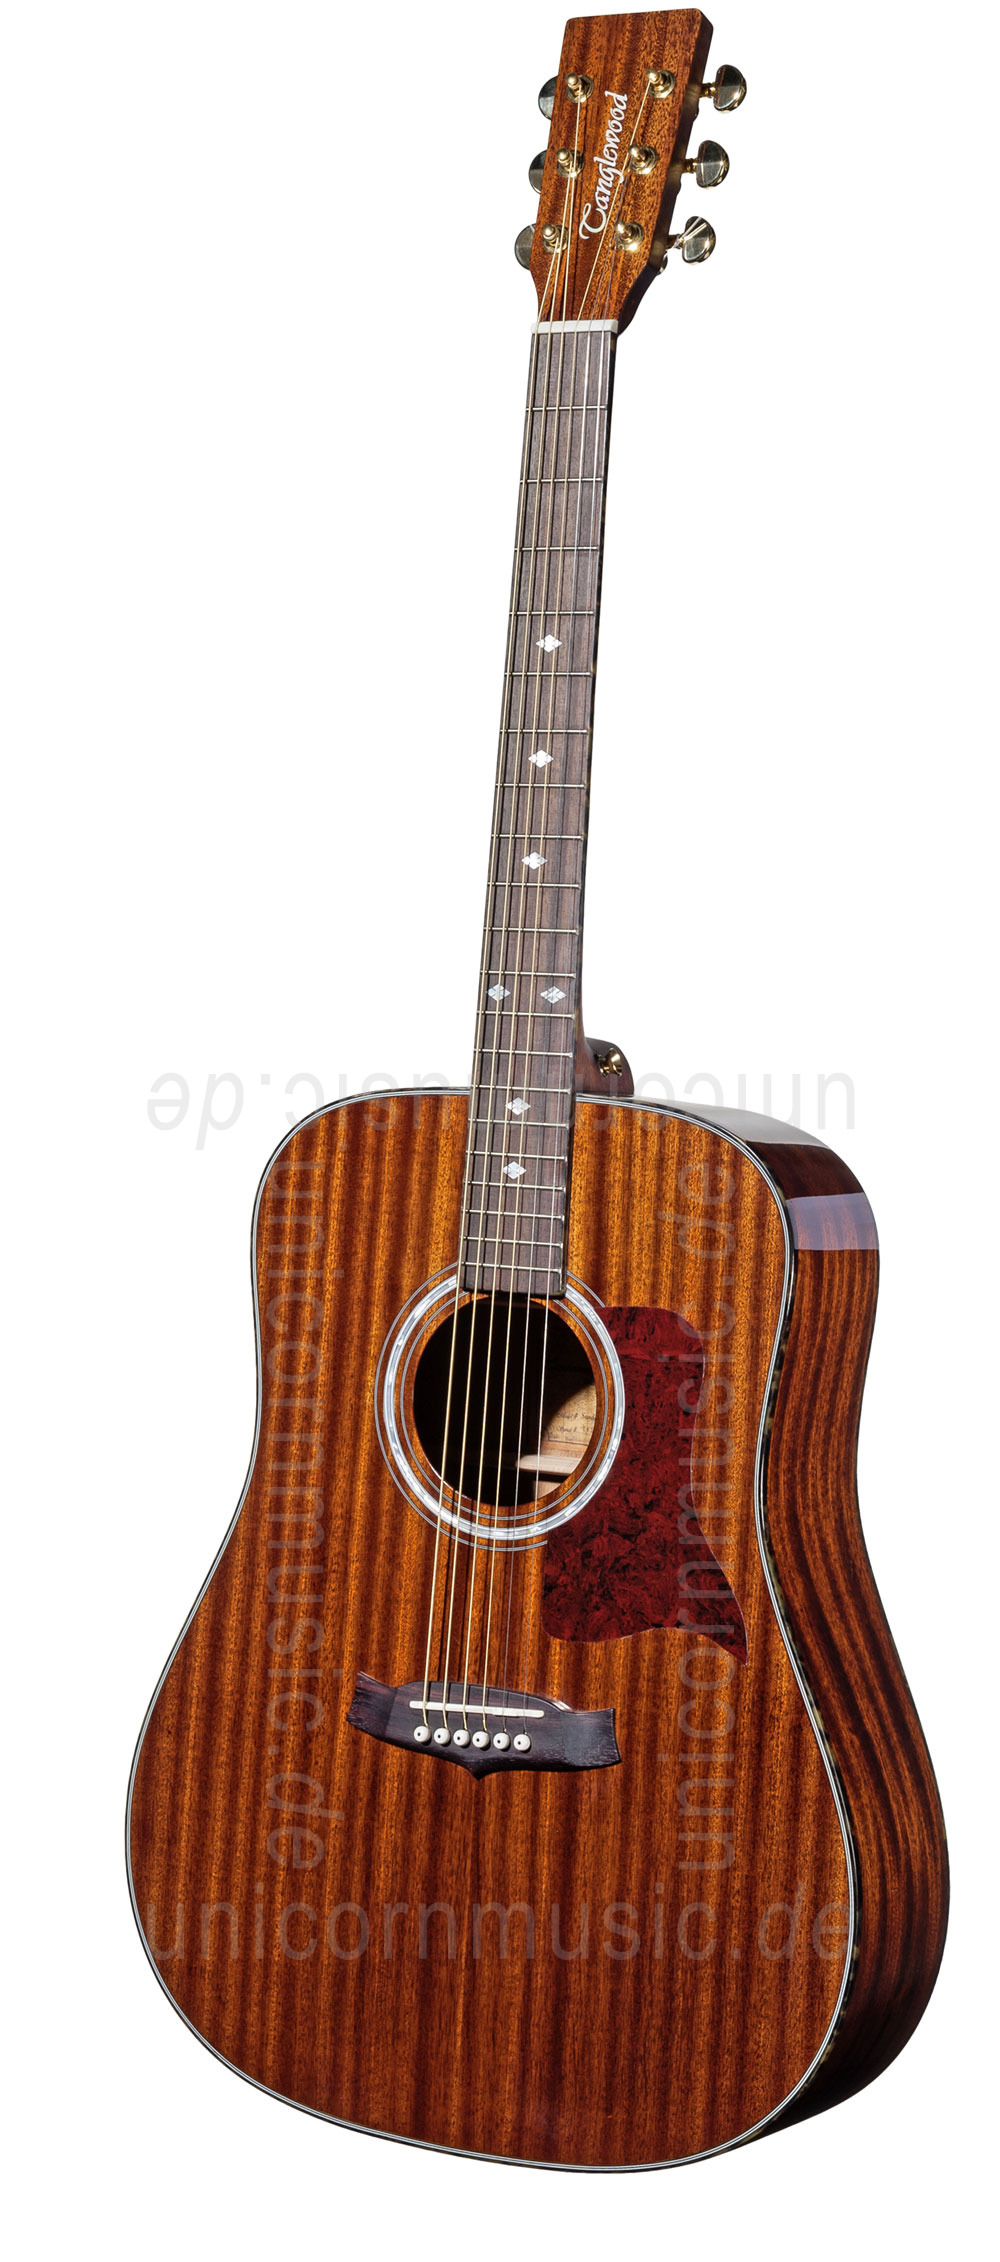 to article description / price Acoustic Guitar TANGLEWOOD TW15/ASM NAT  - Sundance Series - Mahagoni - Dreadnought - all solid